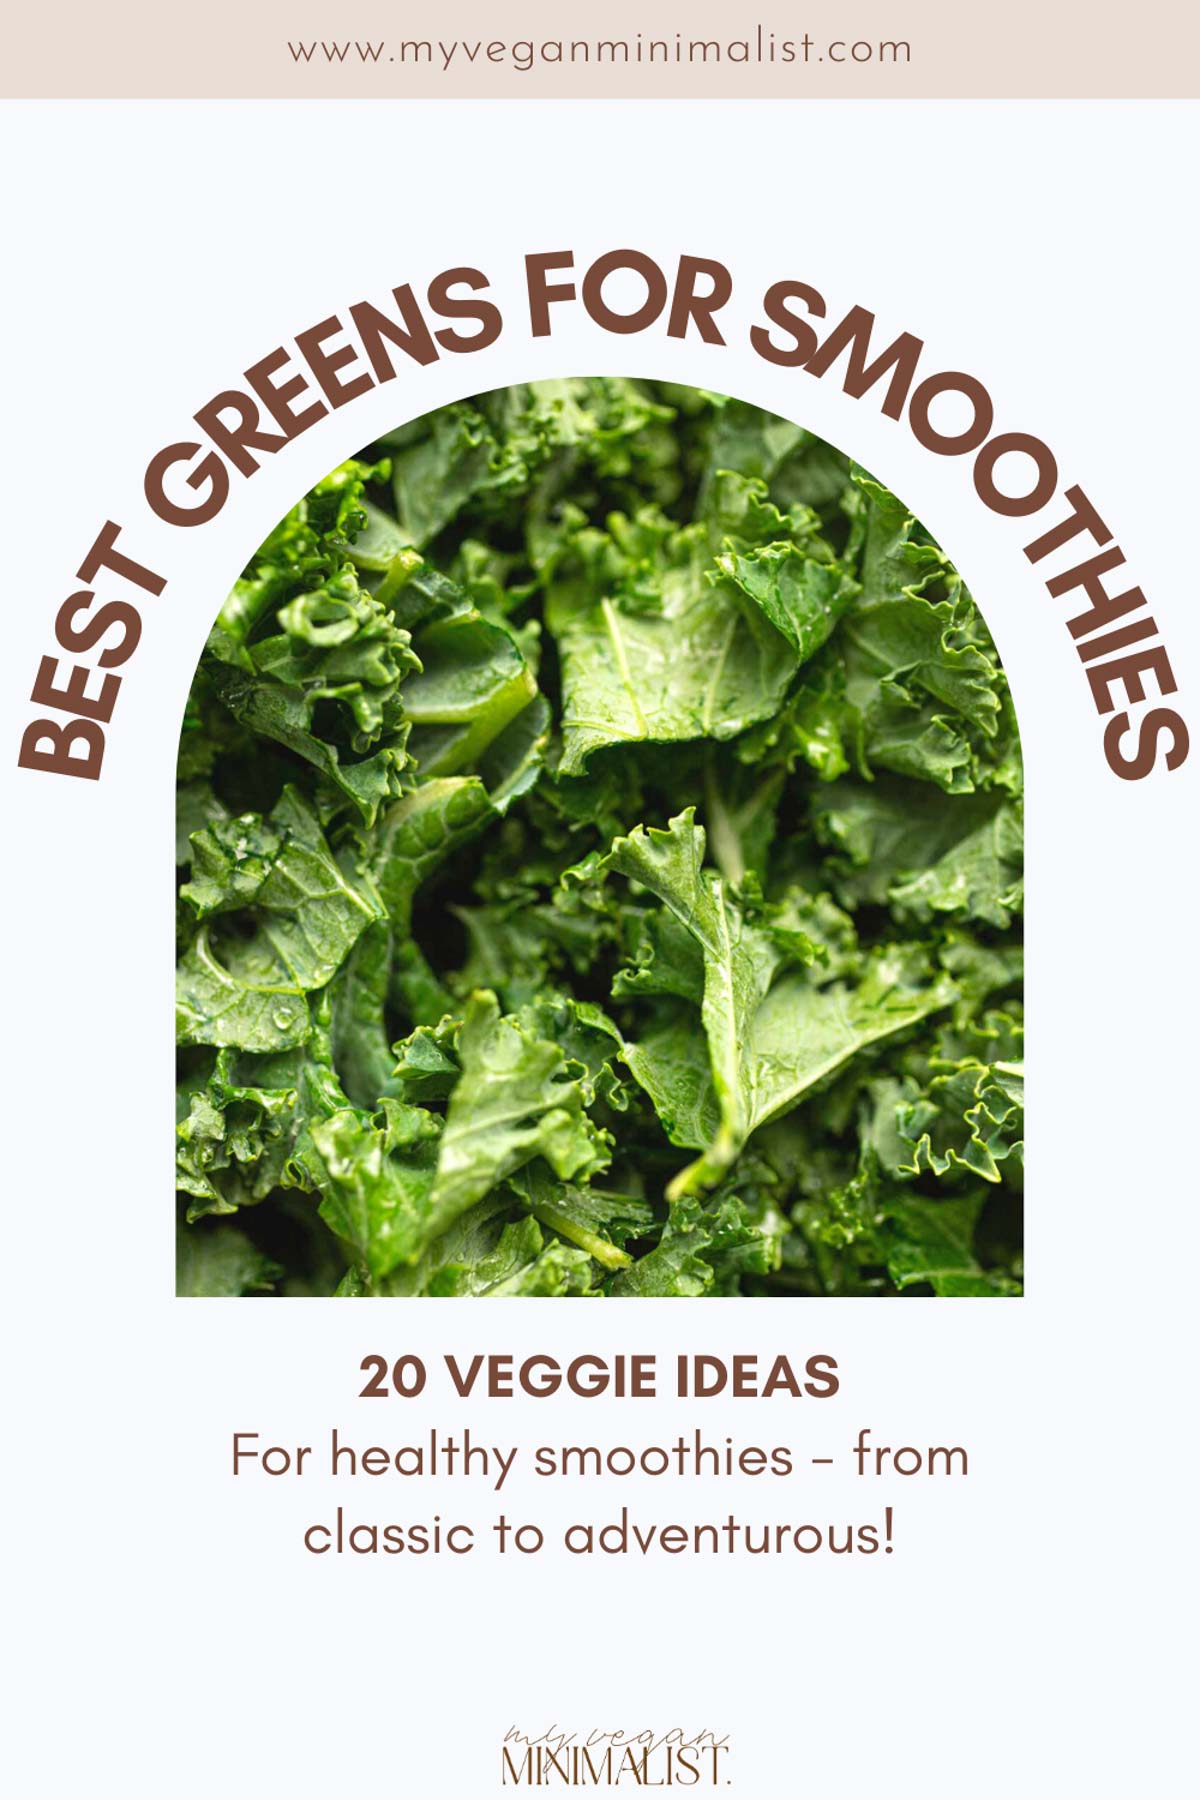 A graphic with an image of kale in the middle and text 'Best Greens for Smoothies' around it.